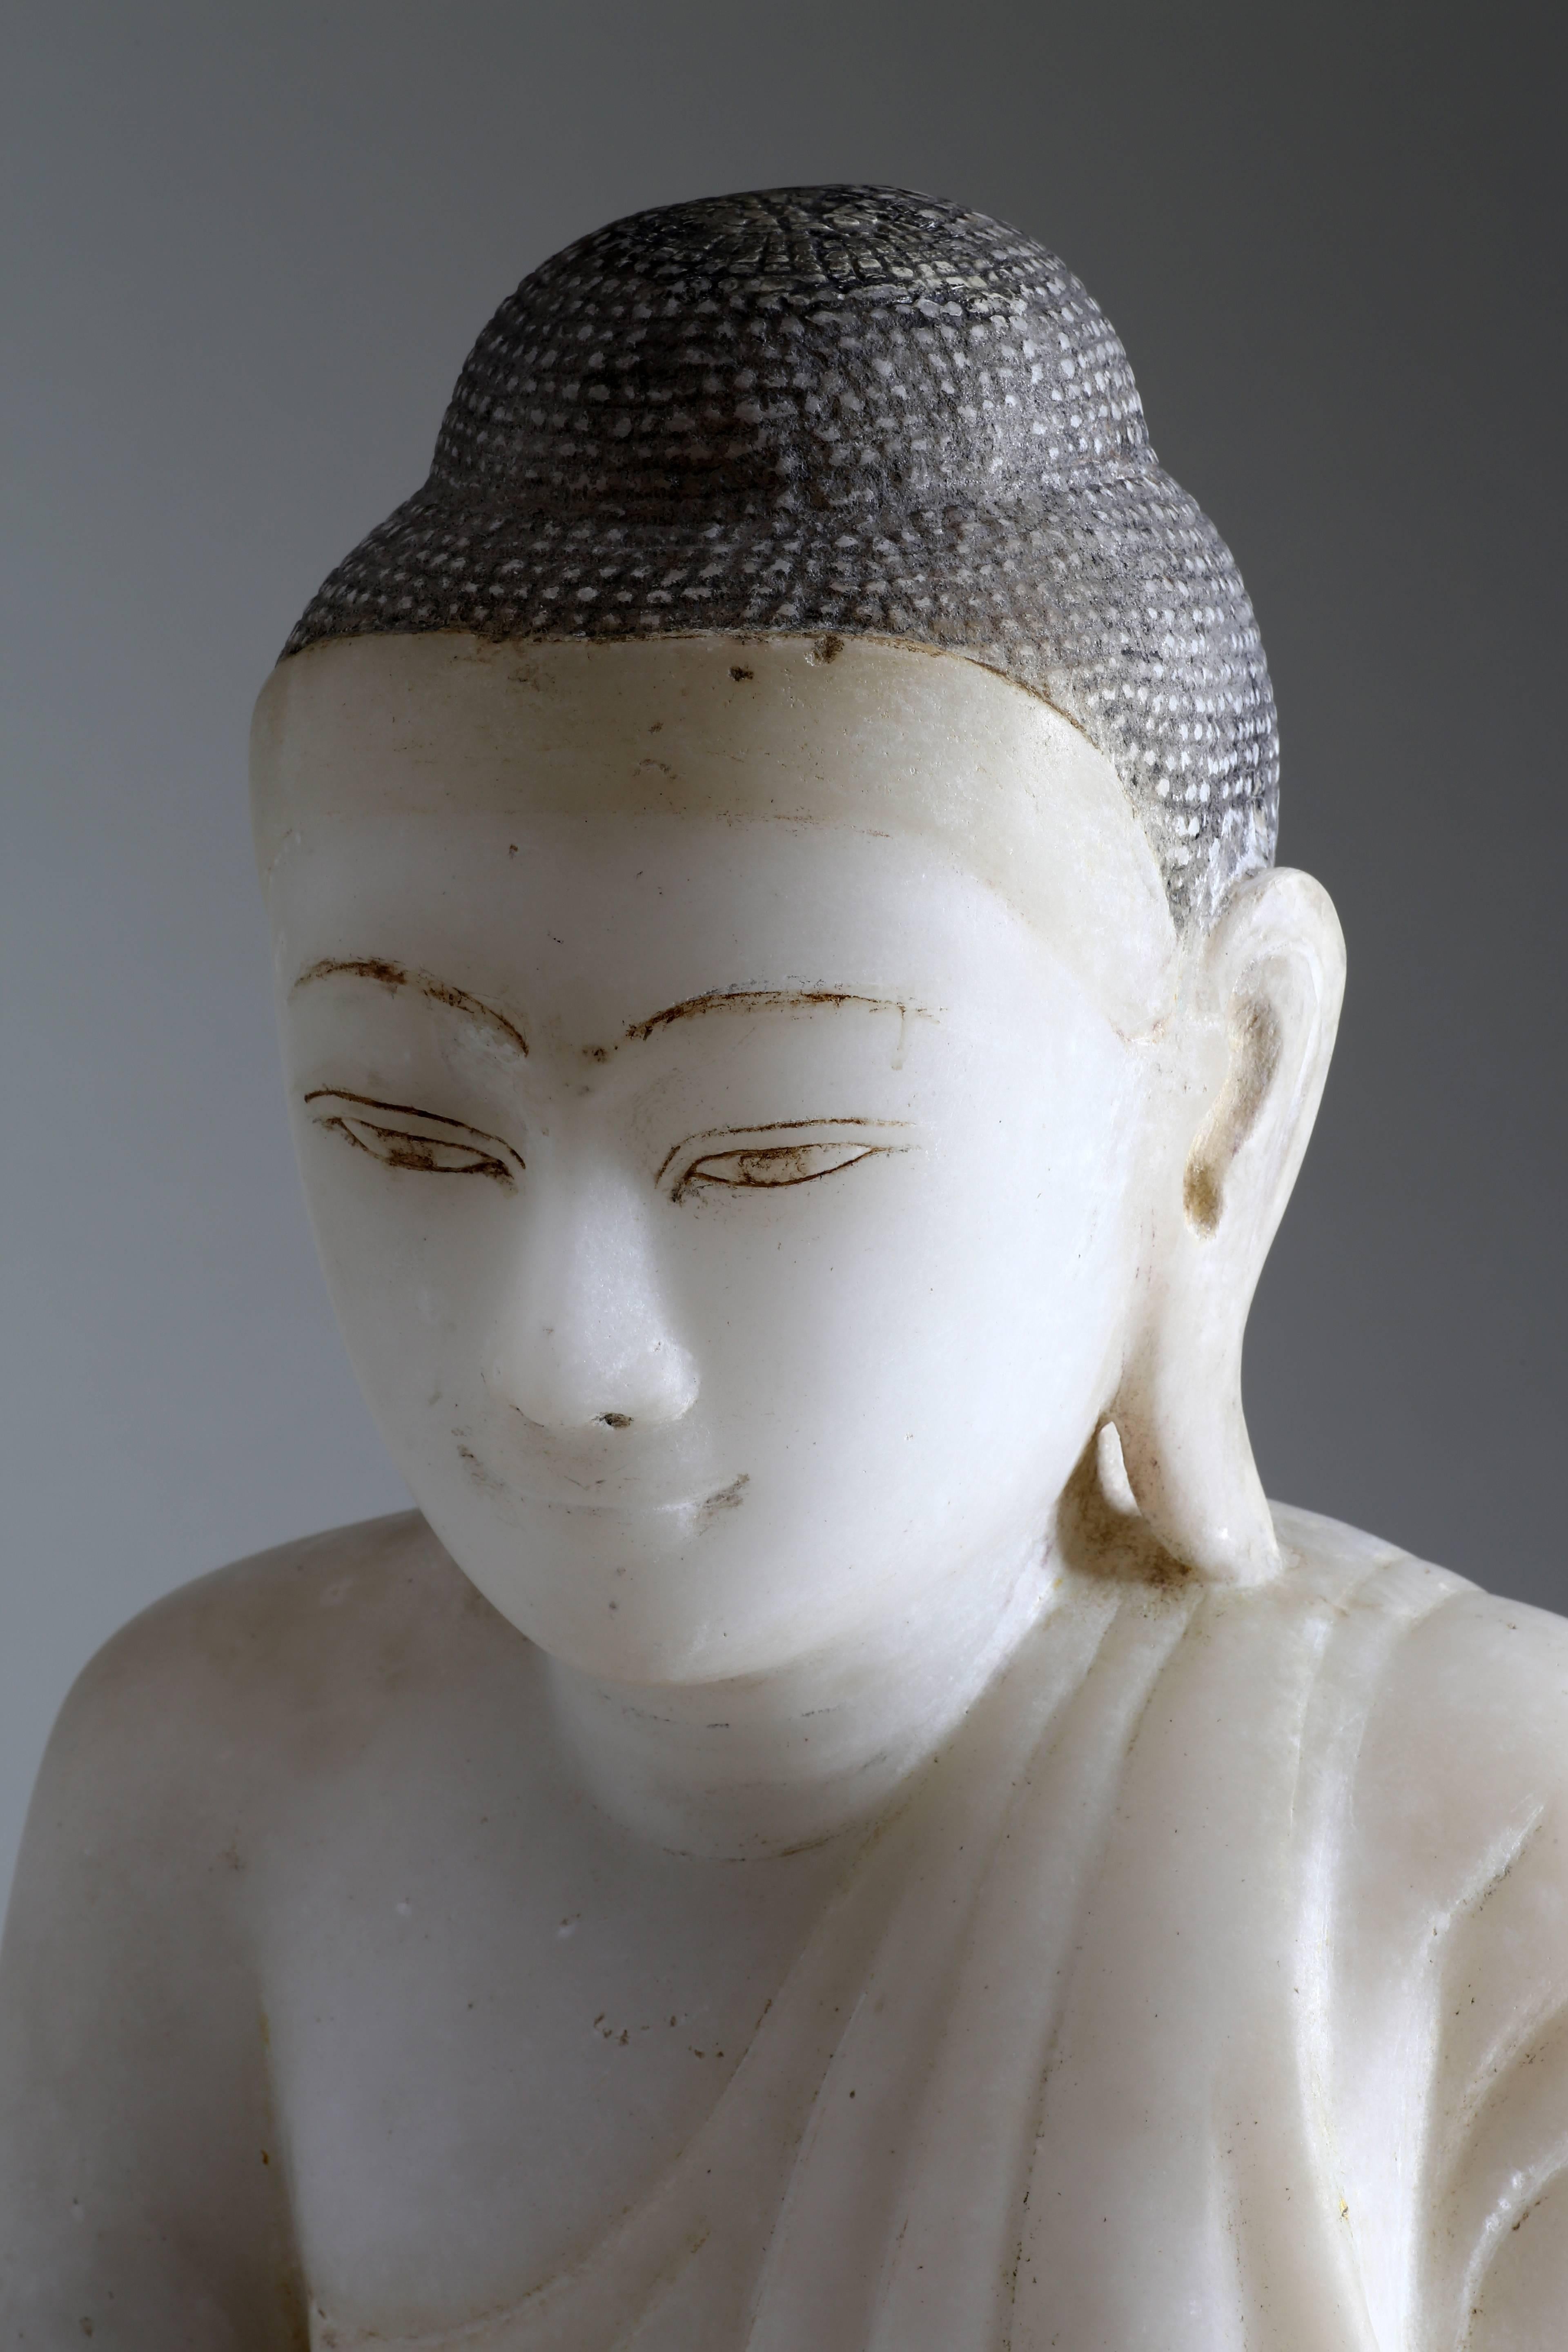 The Buddha is seated on an inscribed low base in vajrasana with bhumisparshamudra, in which the finger-tips of the right hand touch the earth to symbolize the moment of enlightenment. The Buddha is clothed in simple monk’s robes and the billowing